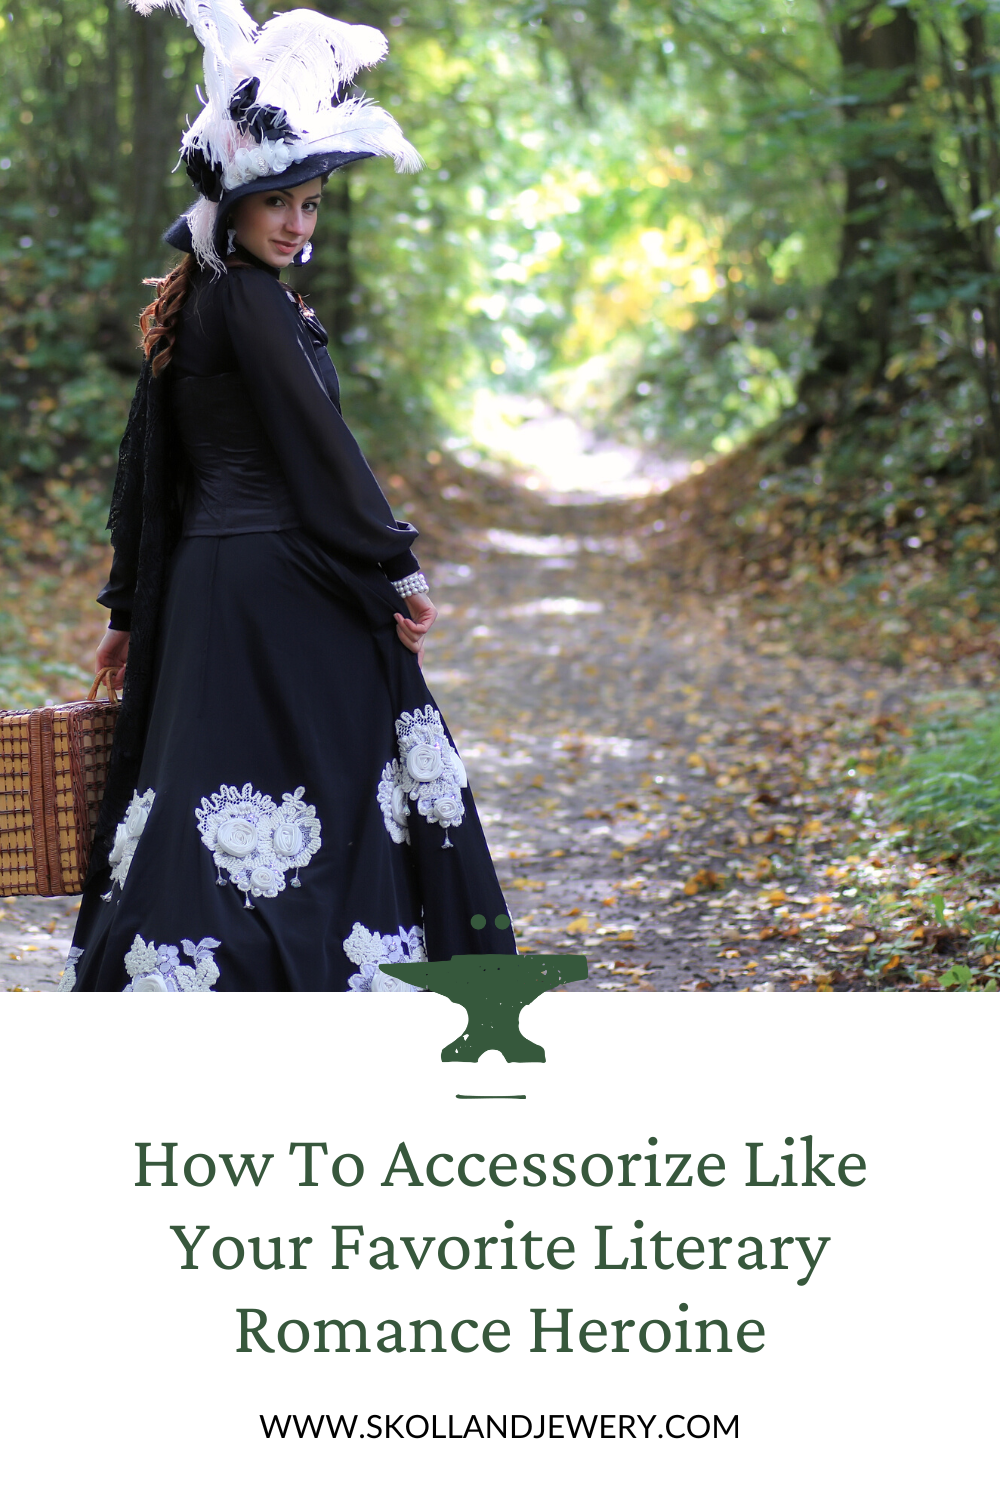 How To Accessorize Like Your Favorite Literary Romance Heroine